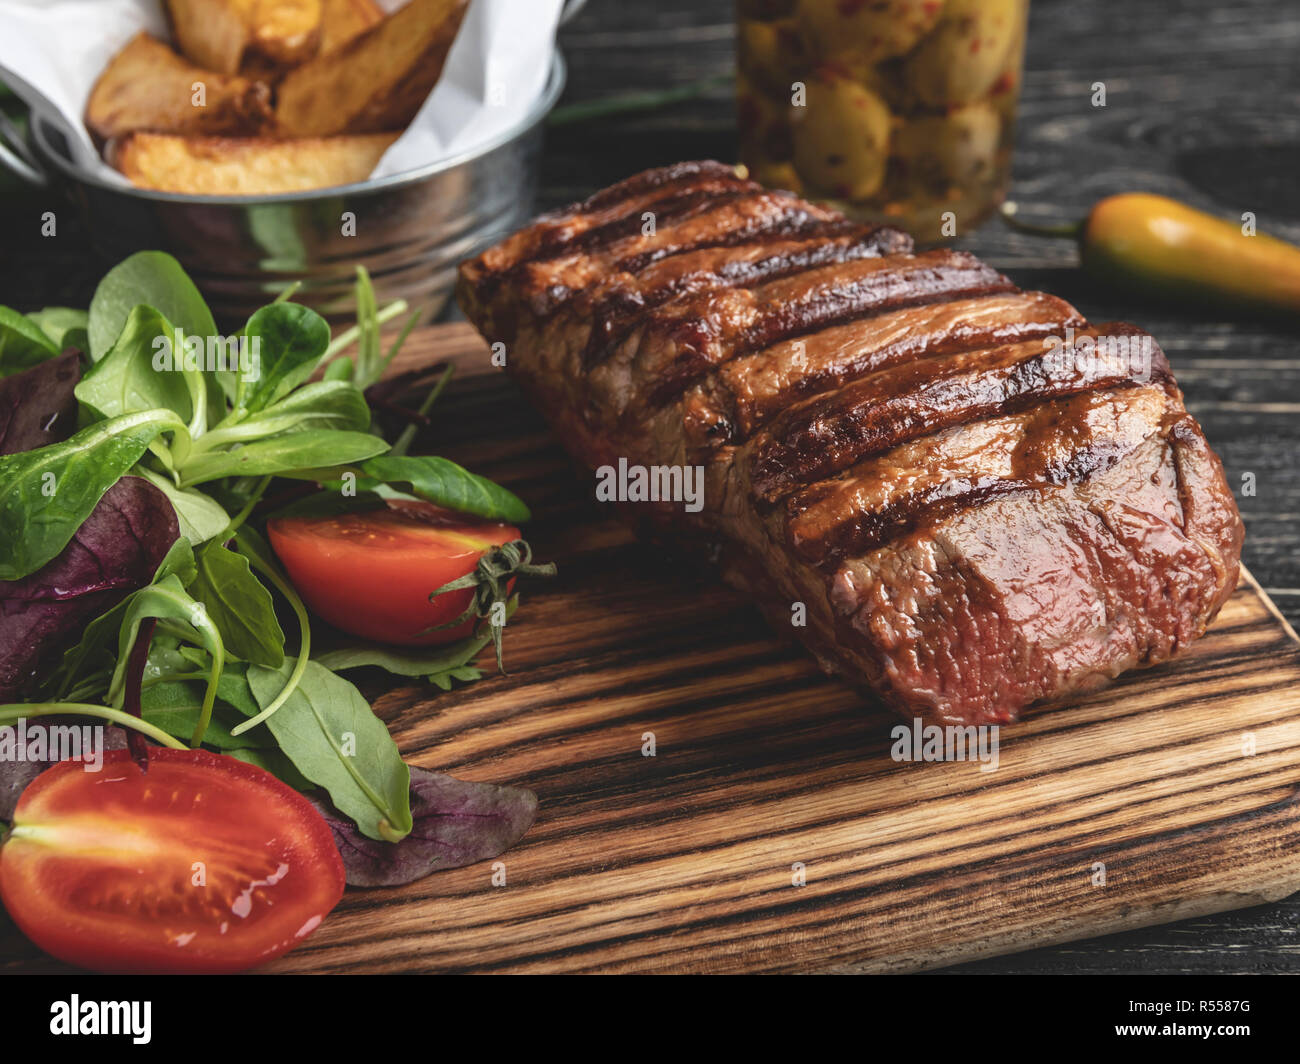 steak on the board with herbs, fried potatoes, spices on a black surface Stock Photo